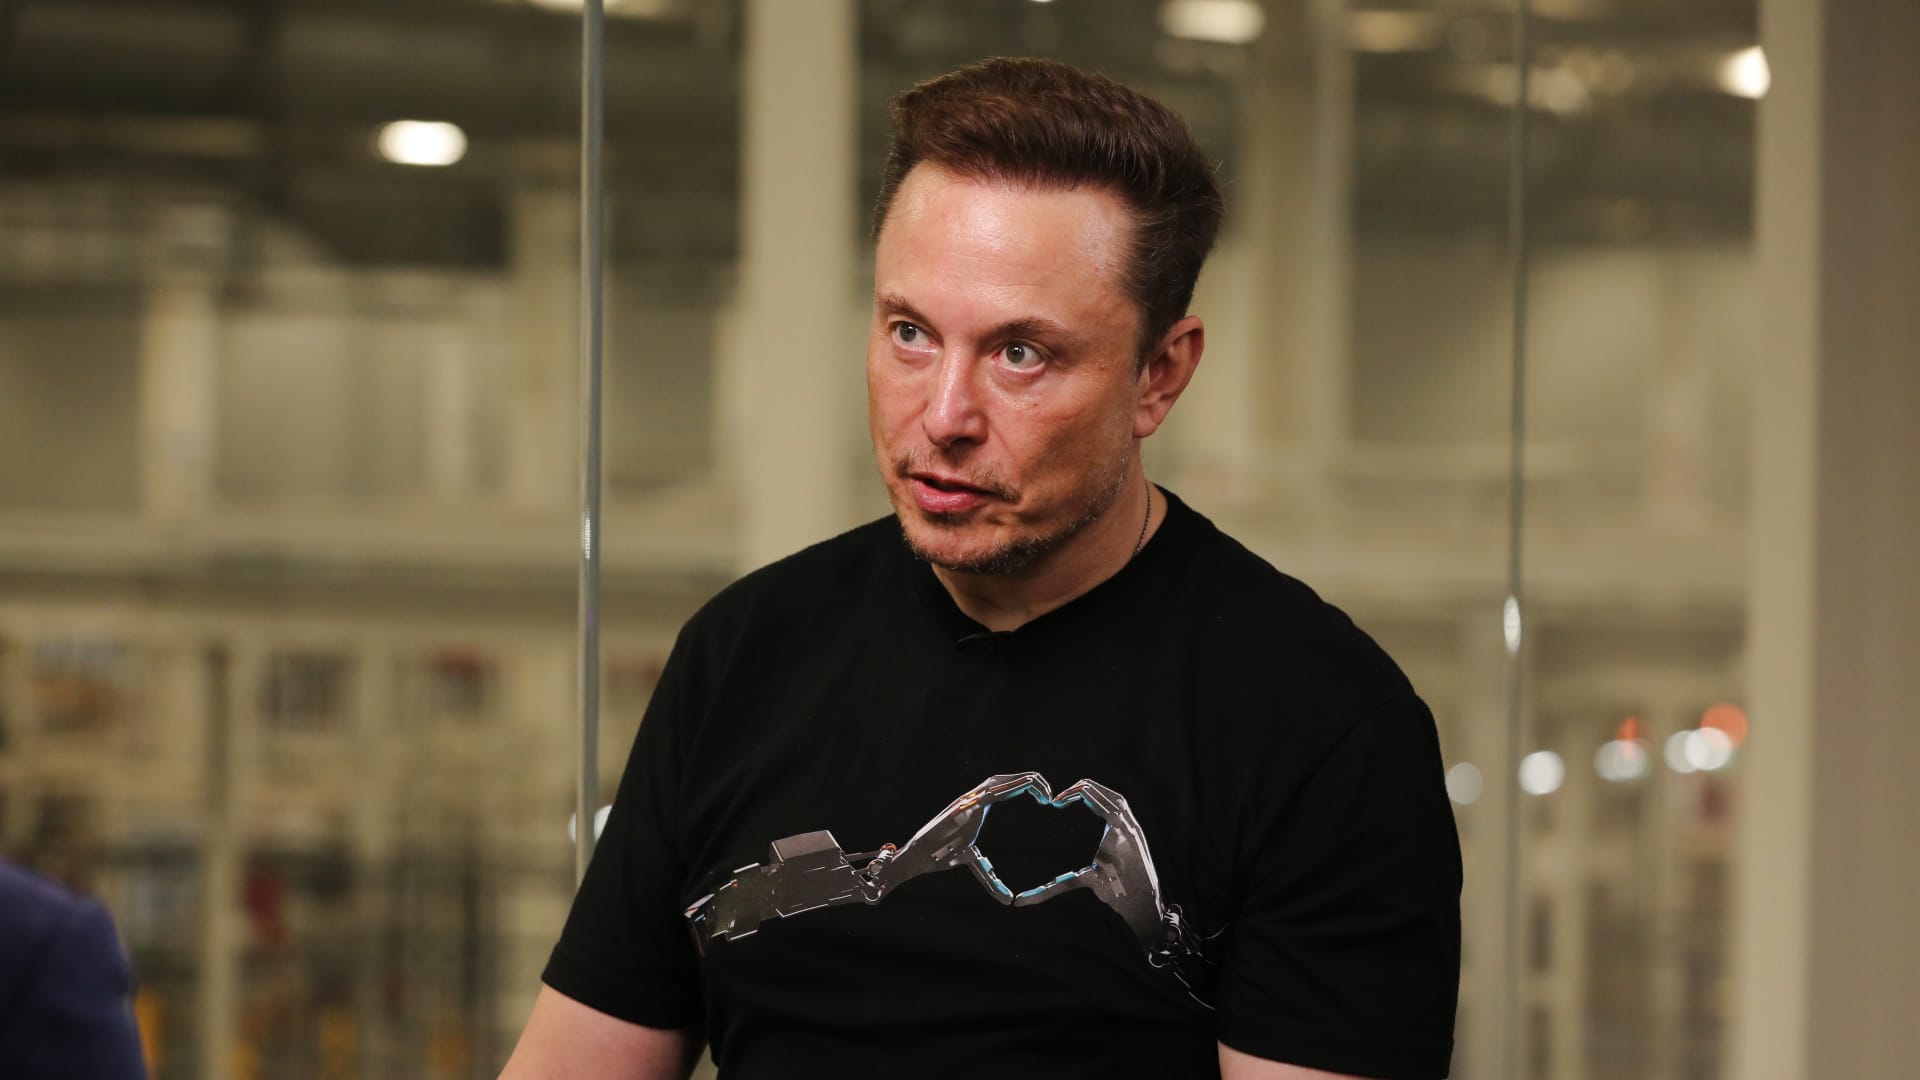 Elon Musk and Twitter face growing brand safety concerns after execs depart